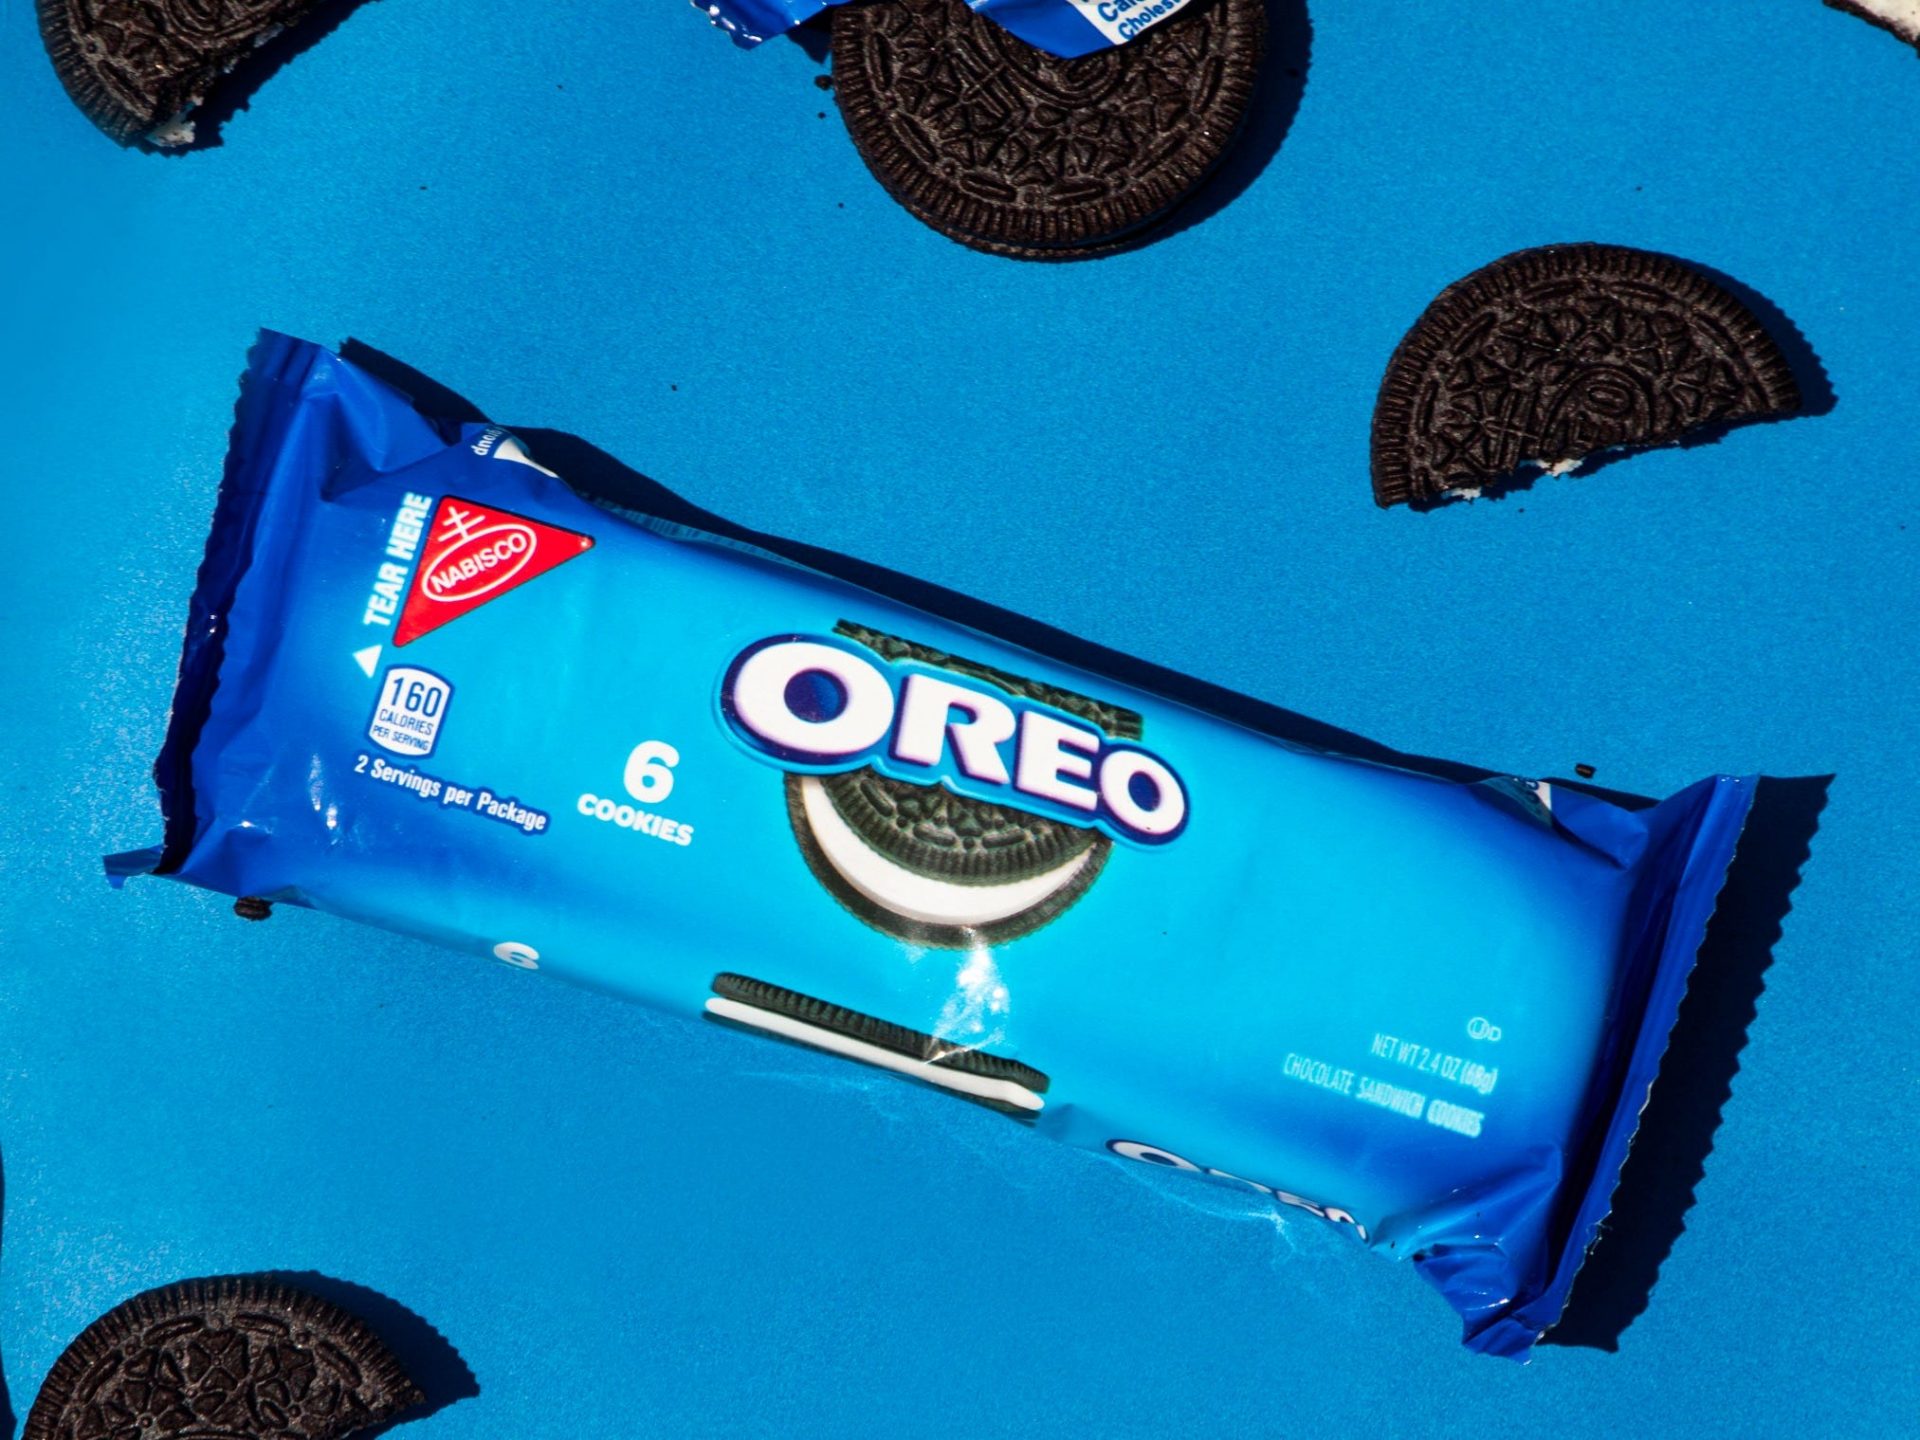 54. Will The Right Mr. Oreo Please Stand Up?